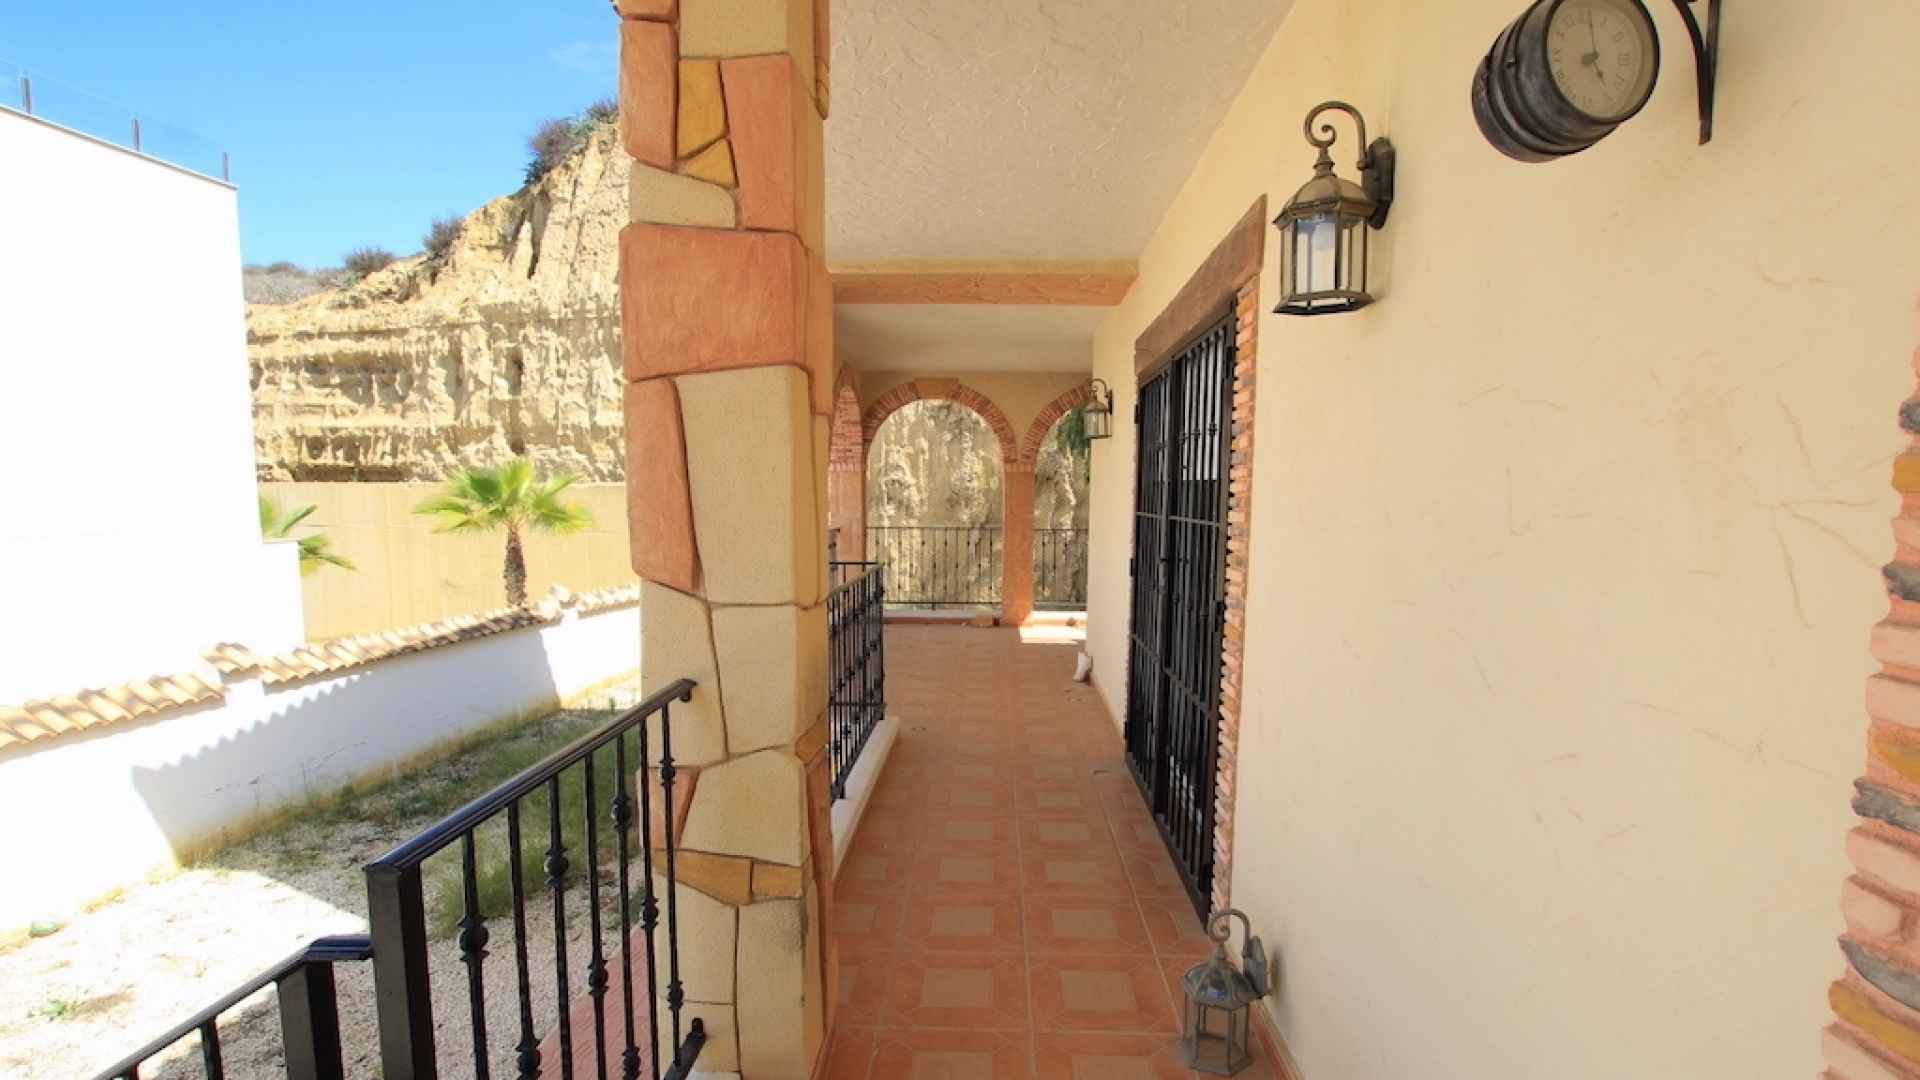 48100_charming_3_bedroom_detached_villa_with_golf_course_views_310523142109_img_3985